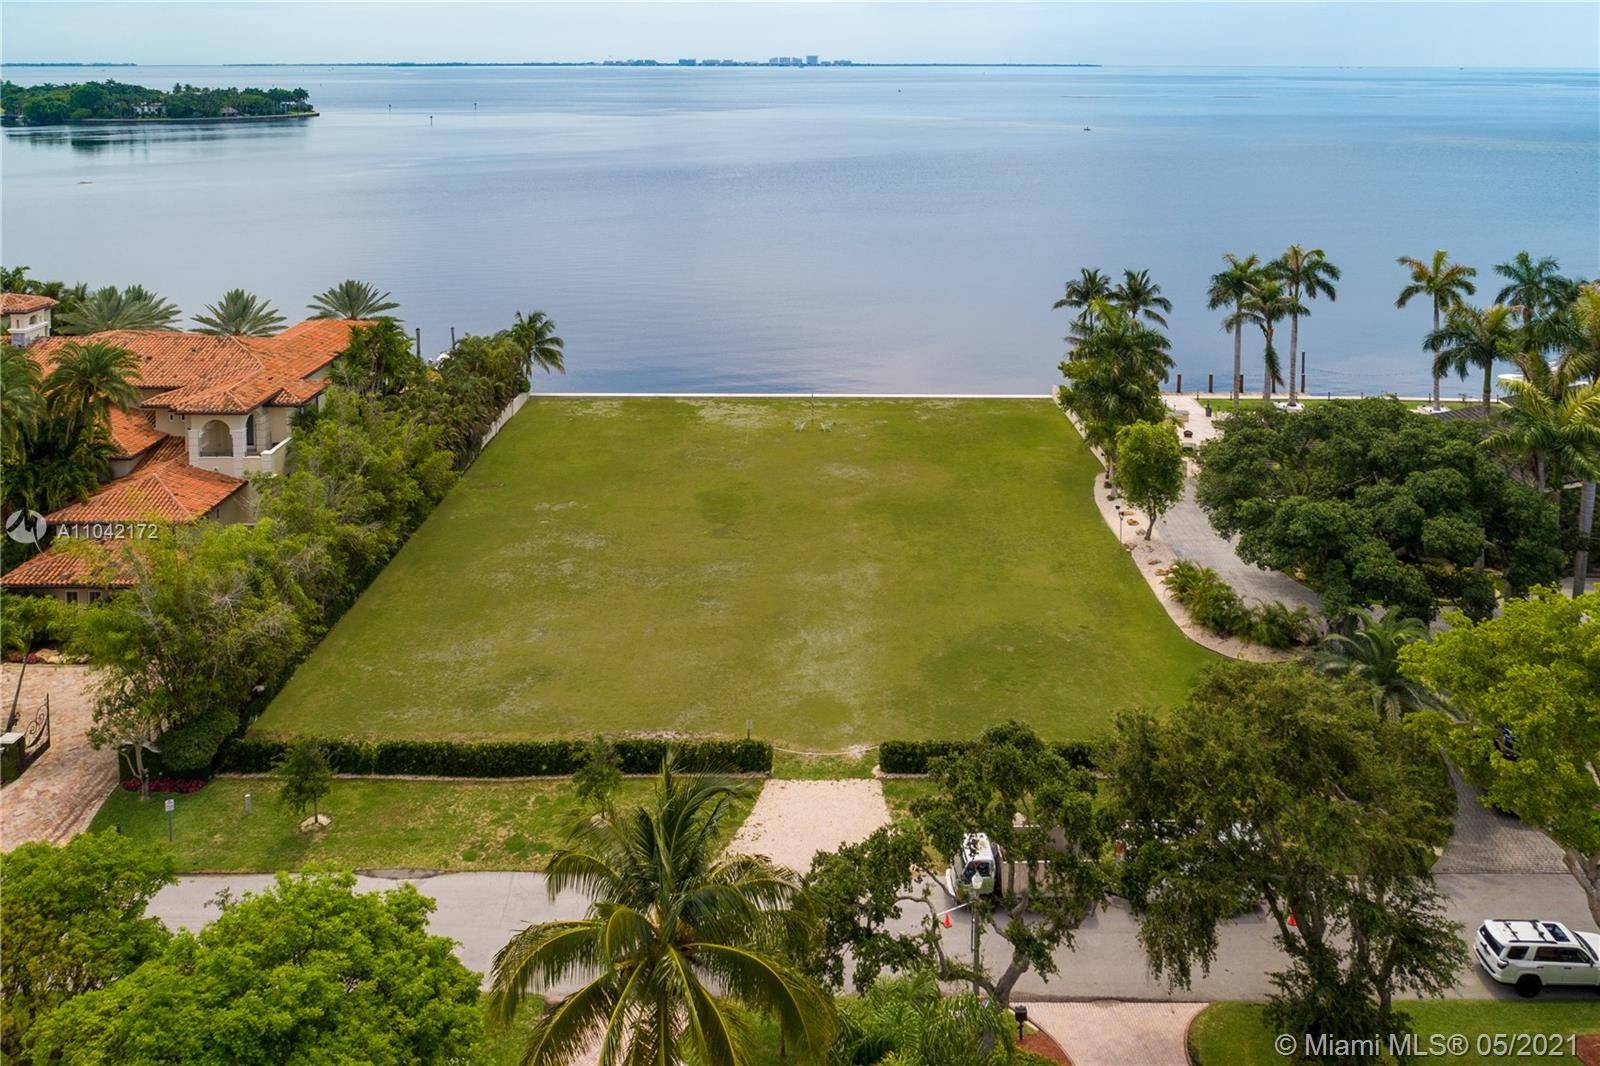 Rare opportunity to own a stunning bay front lot in Old Cutler Bay with amazing views looking east towards Key Biscayne.